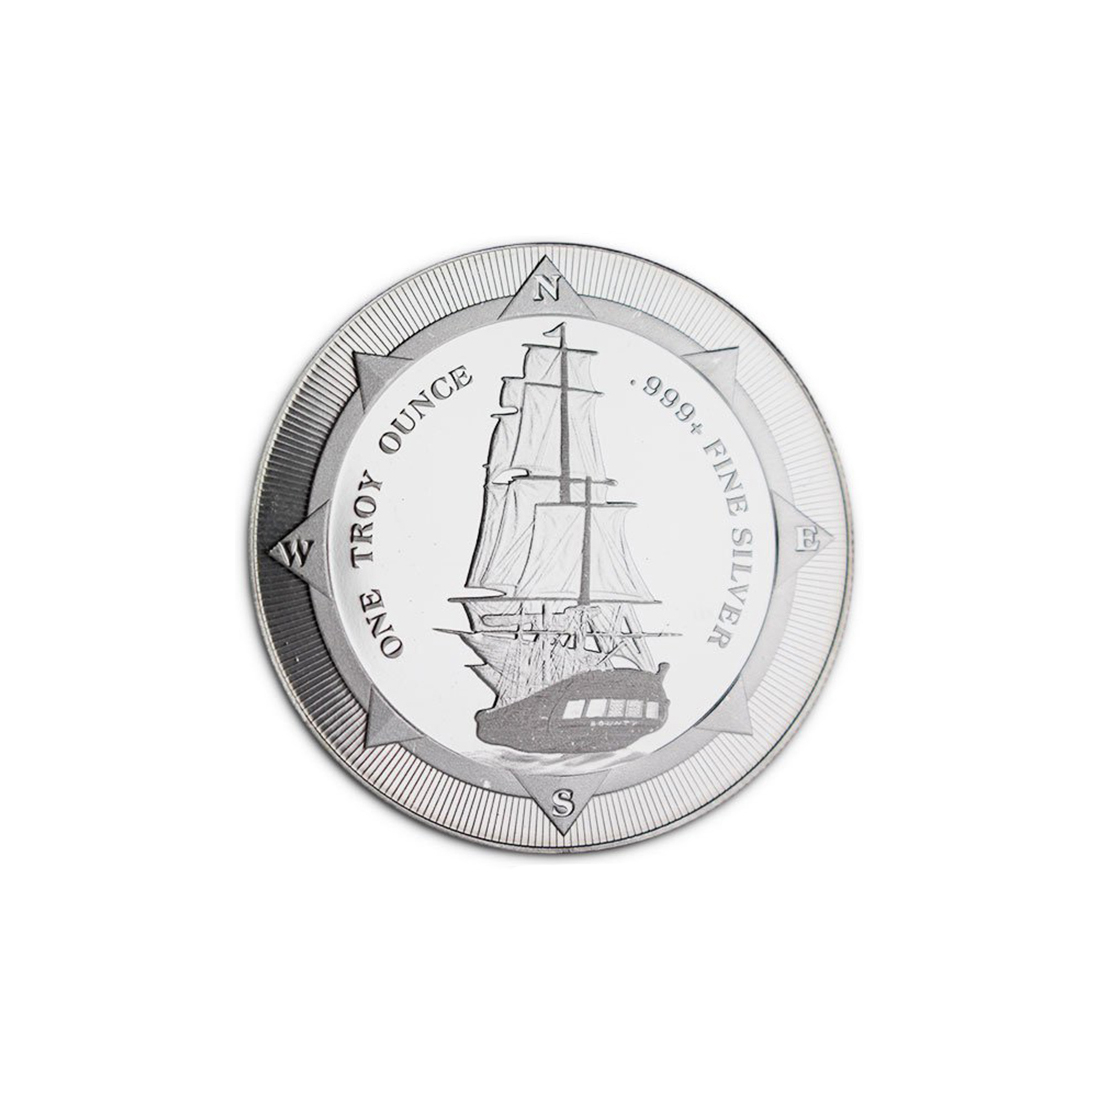 New Zealand Silver Coins